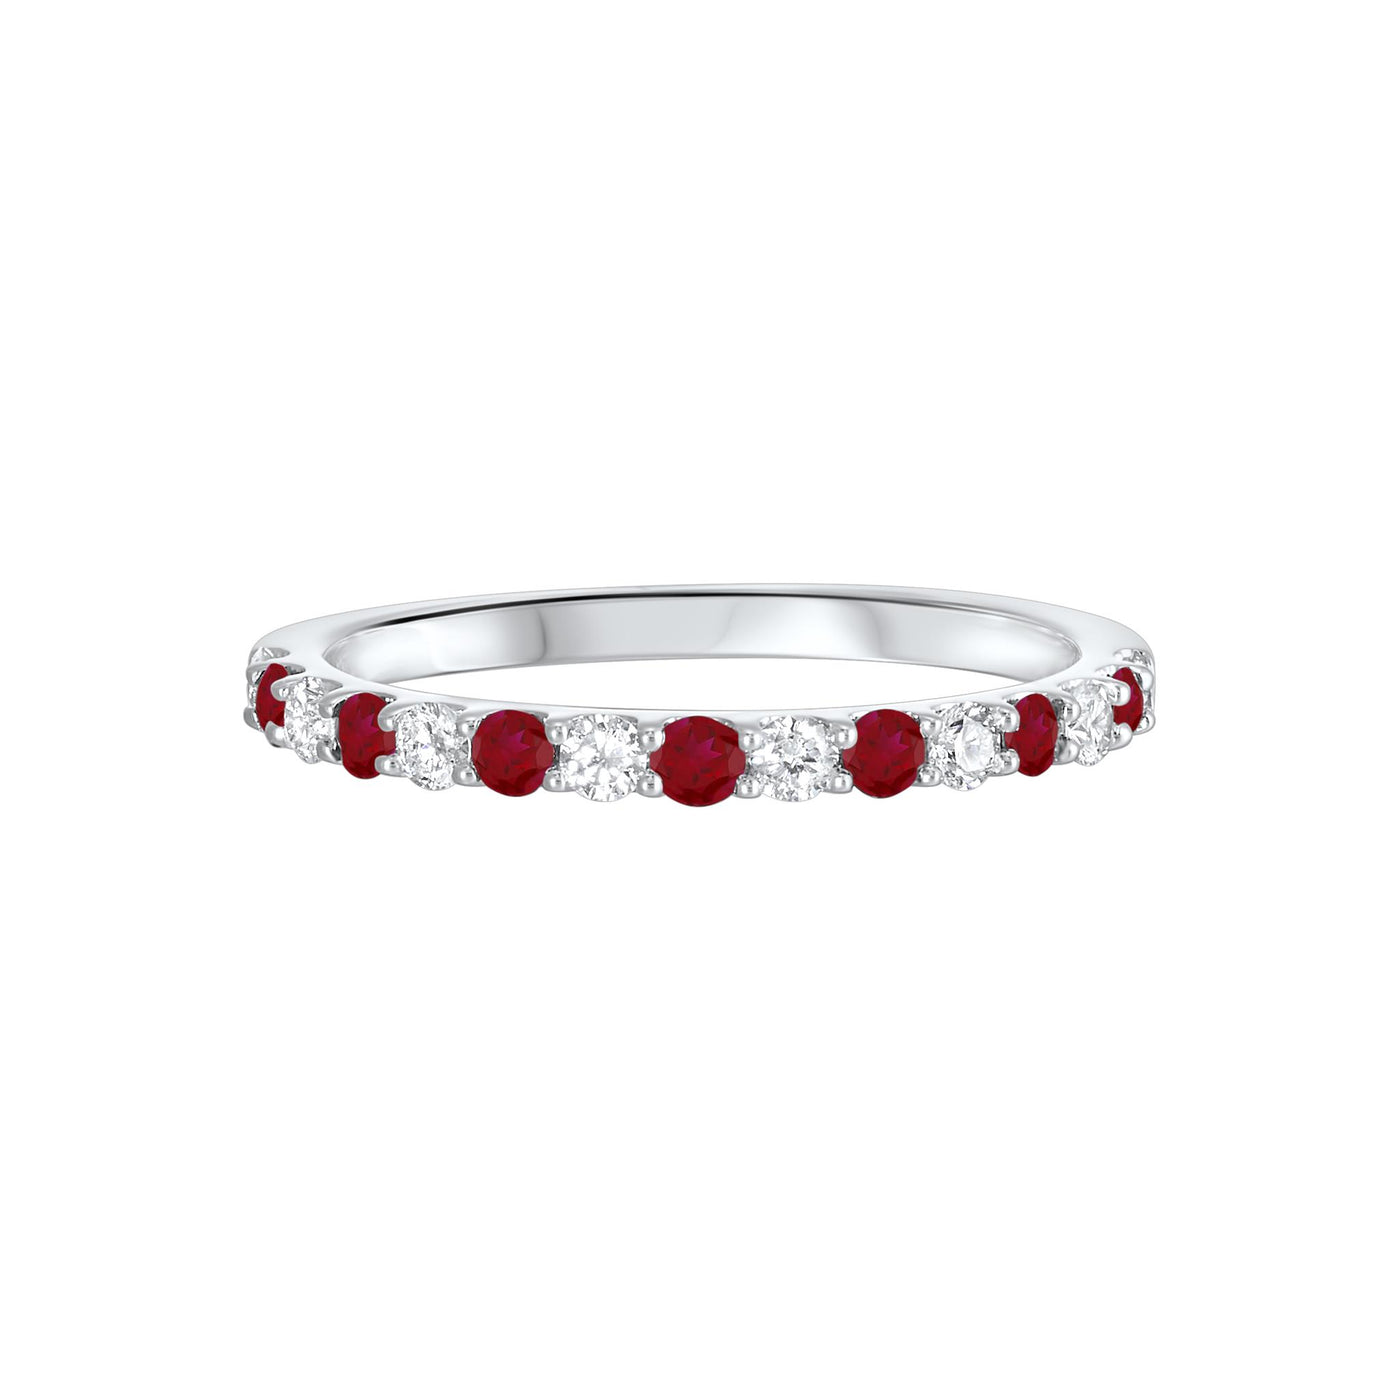 14K White Gold .58ctw Alternating Gemstone Style Ring with Diamonds and Rubies